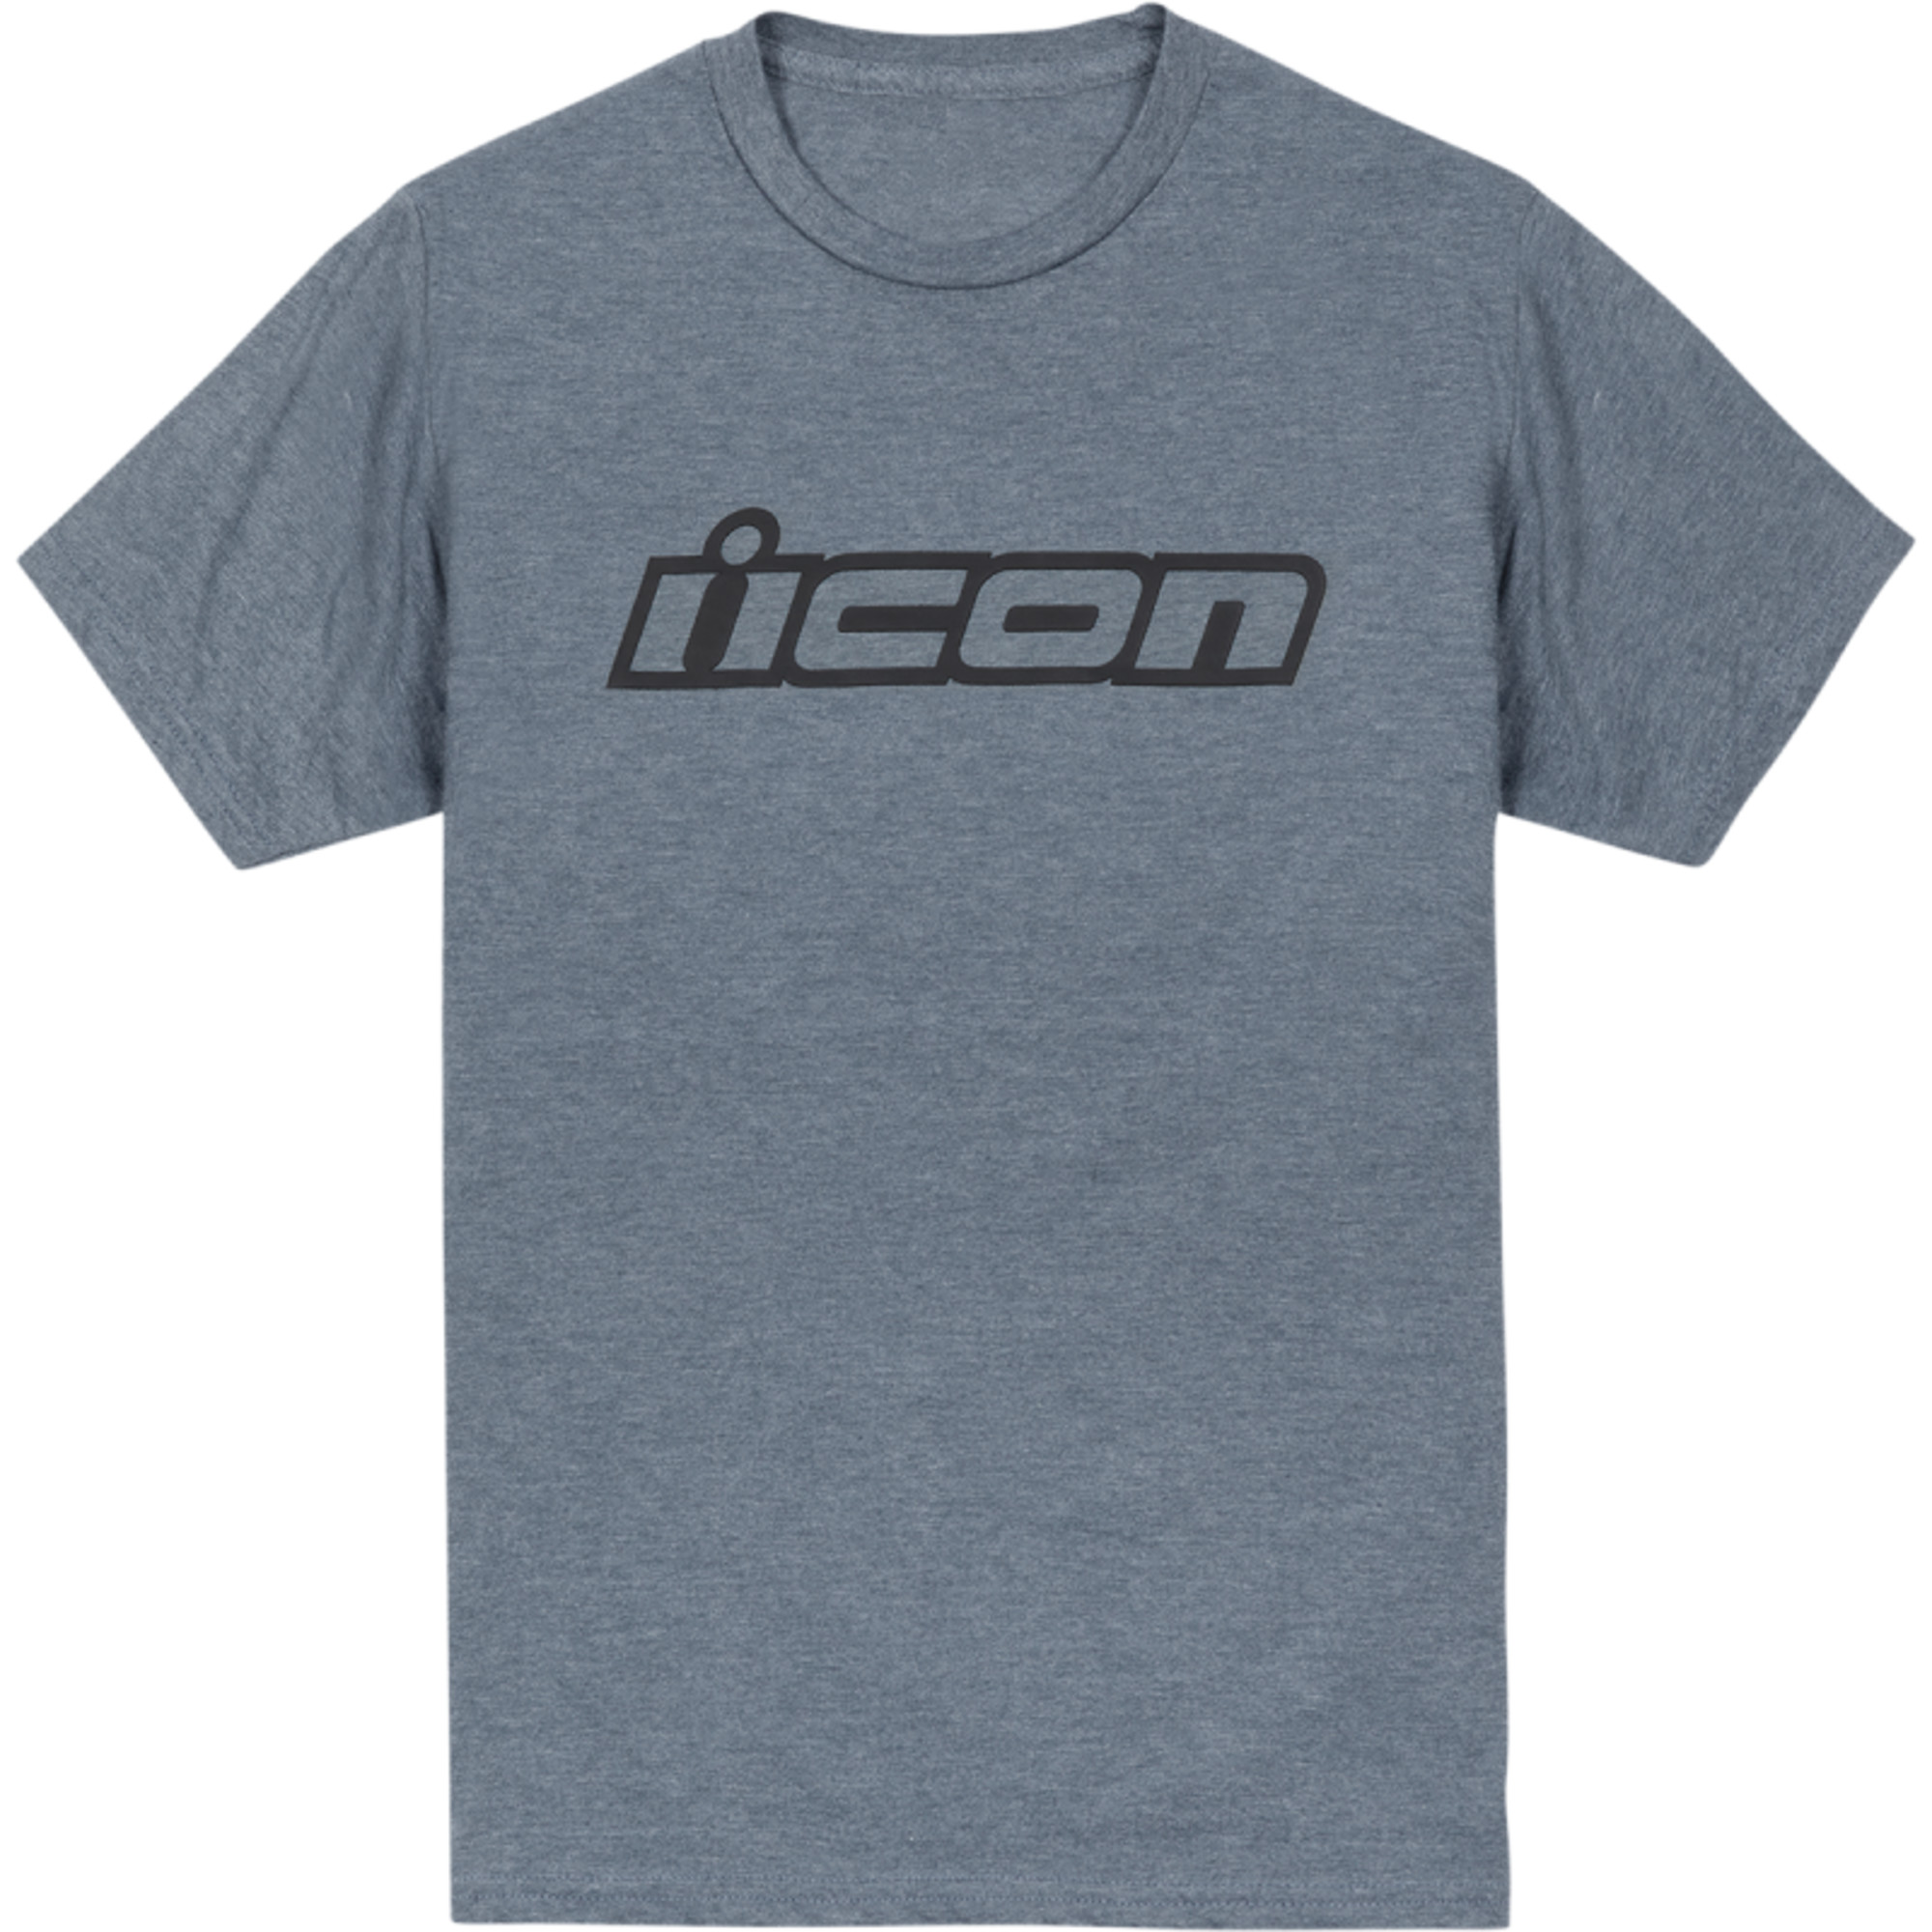 icon t-shirt shirts for men clasicon